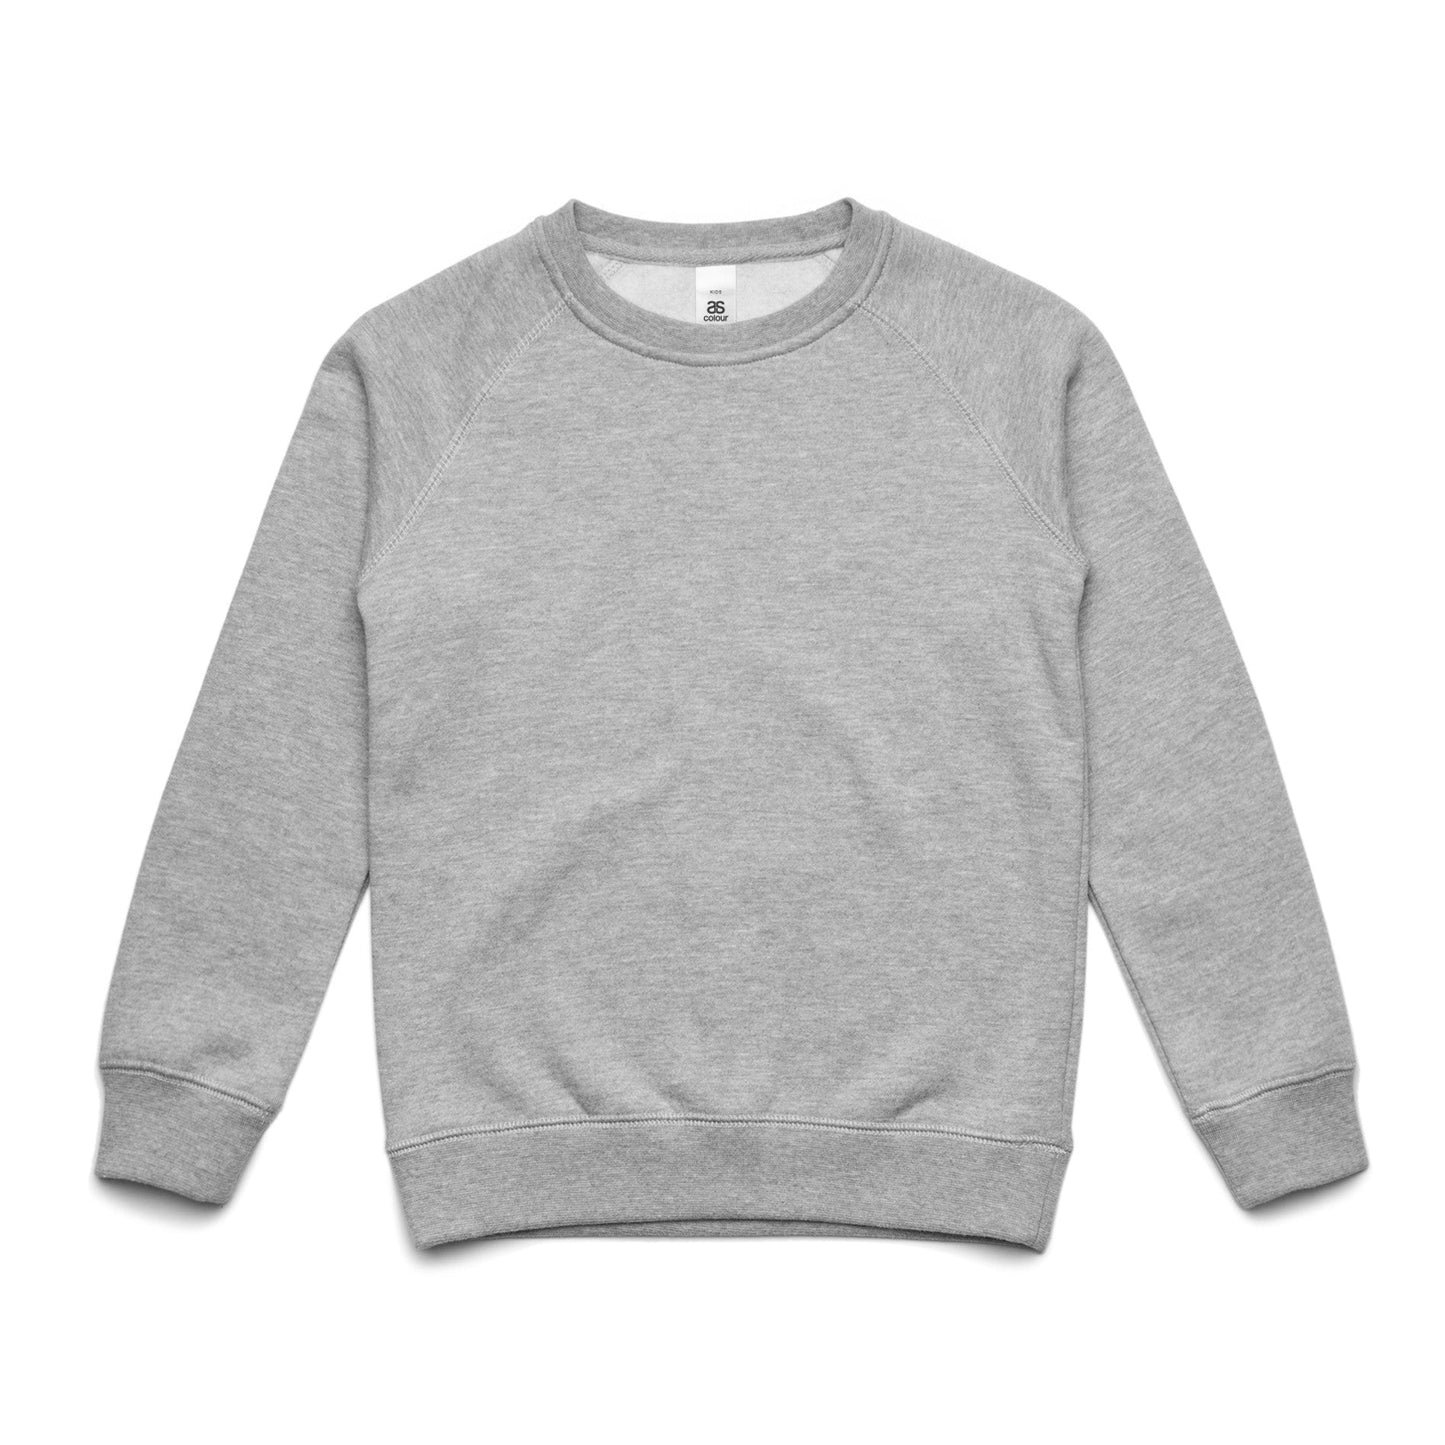 Line Drawing Embroidered Teen Crewneck